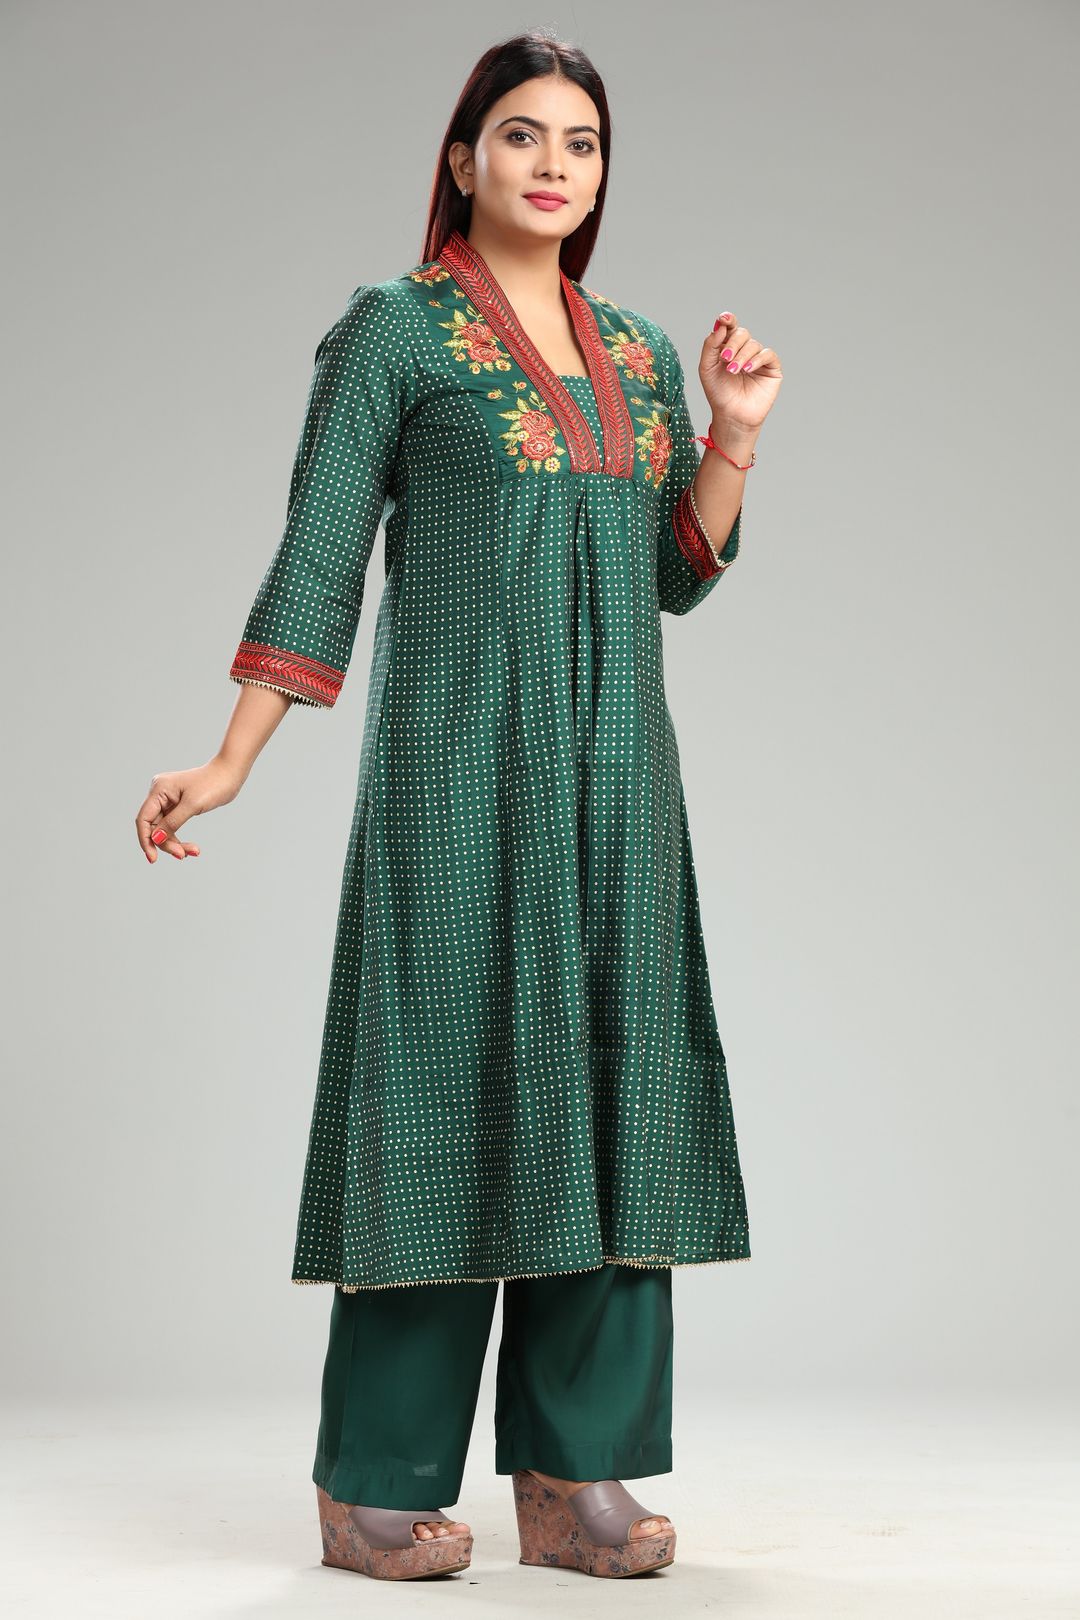 Buy Online - Kanchan- CC4 Green Cotton Silk Embroidered Suit Set